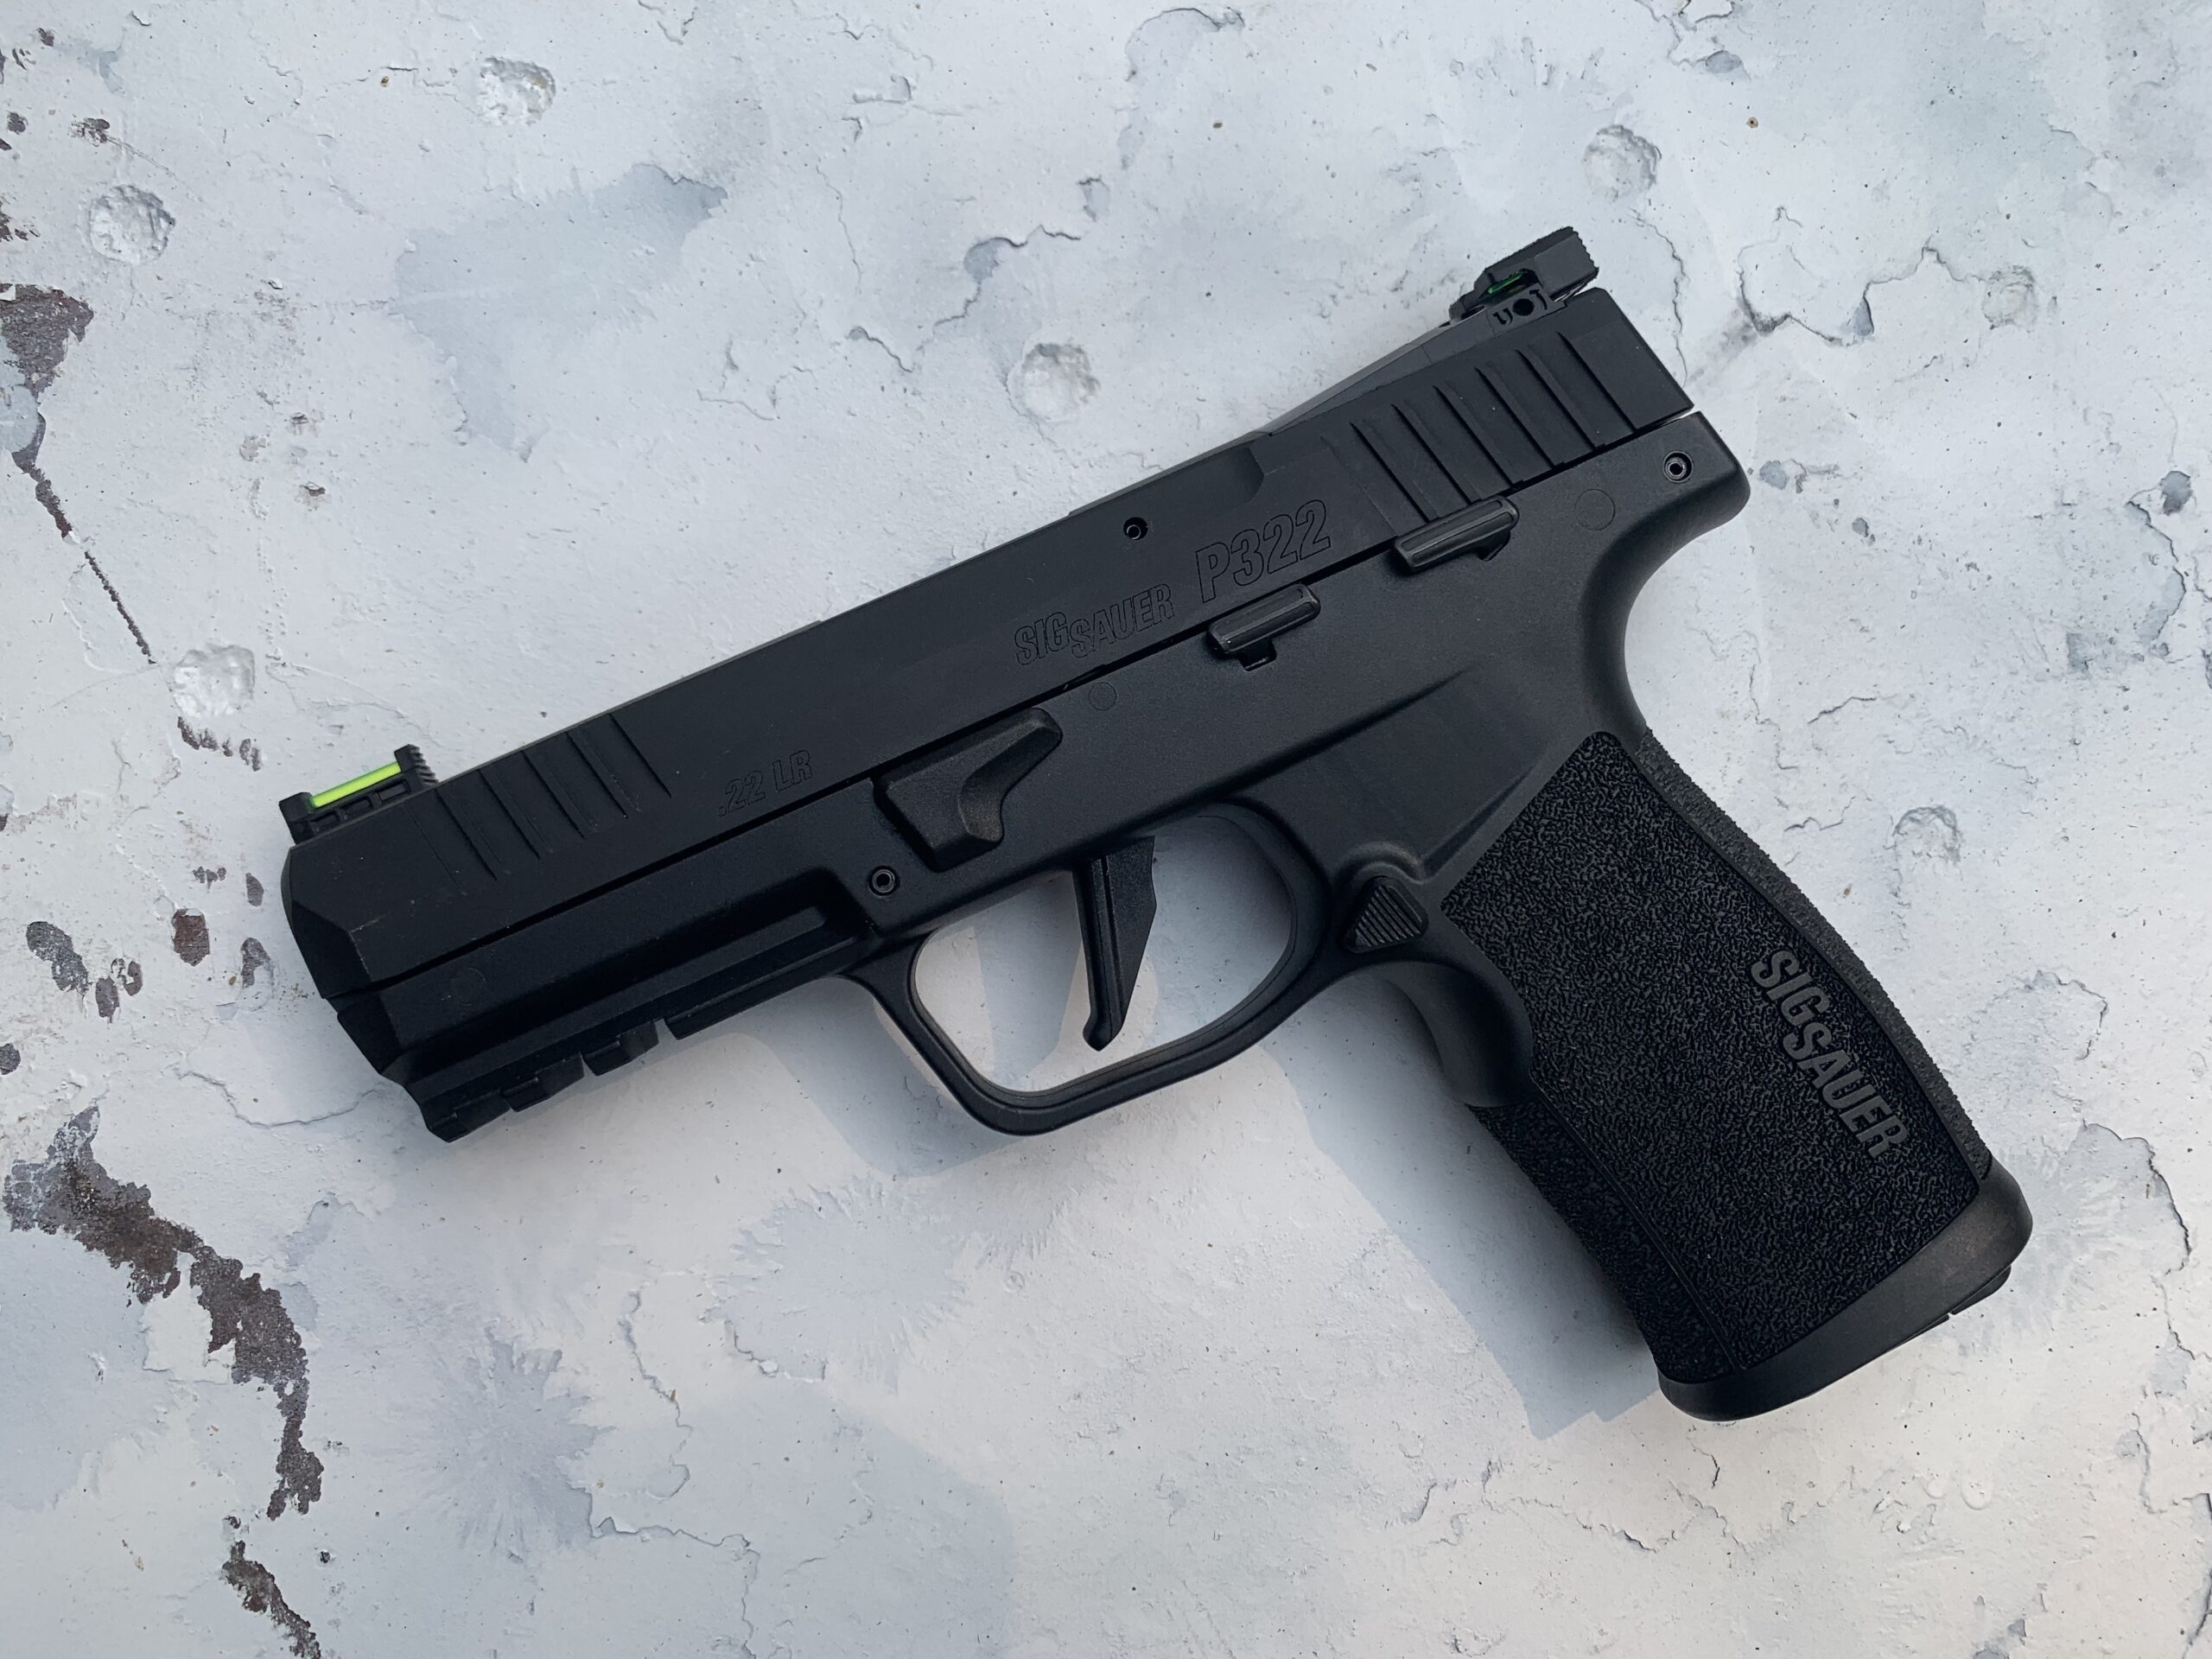 The Sig P322